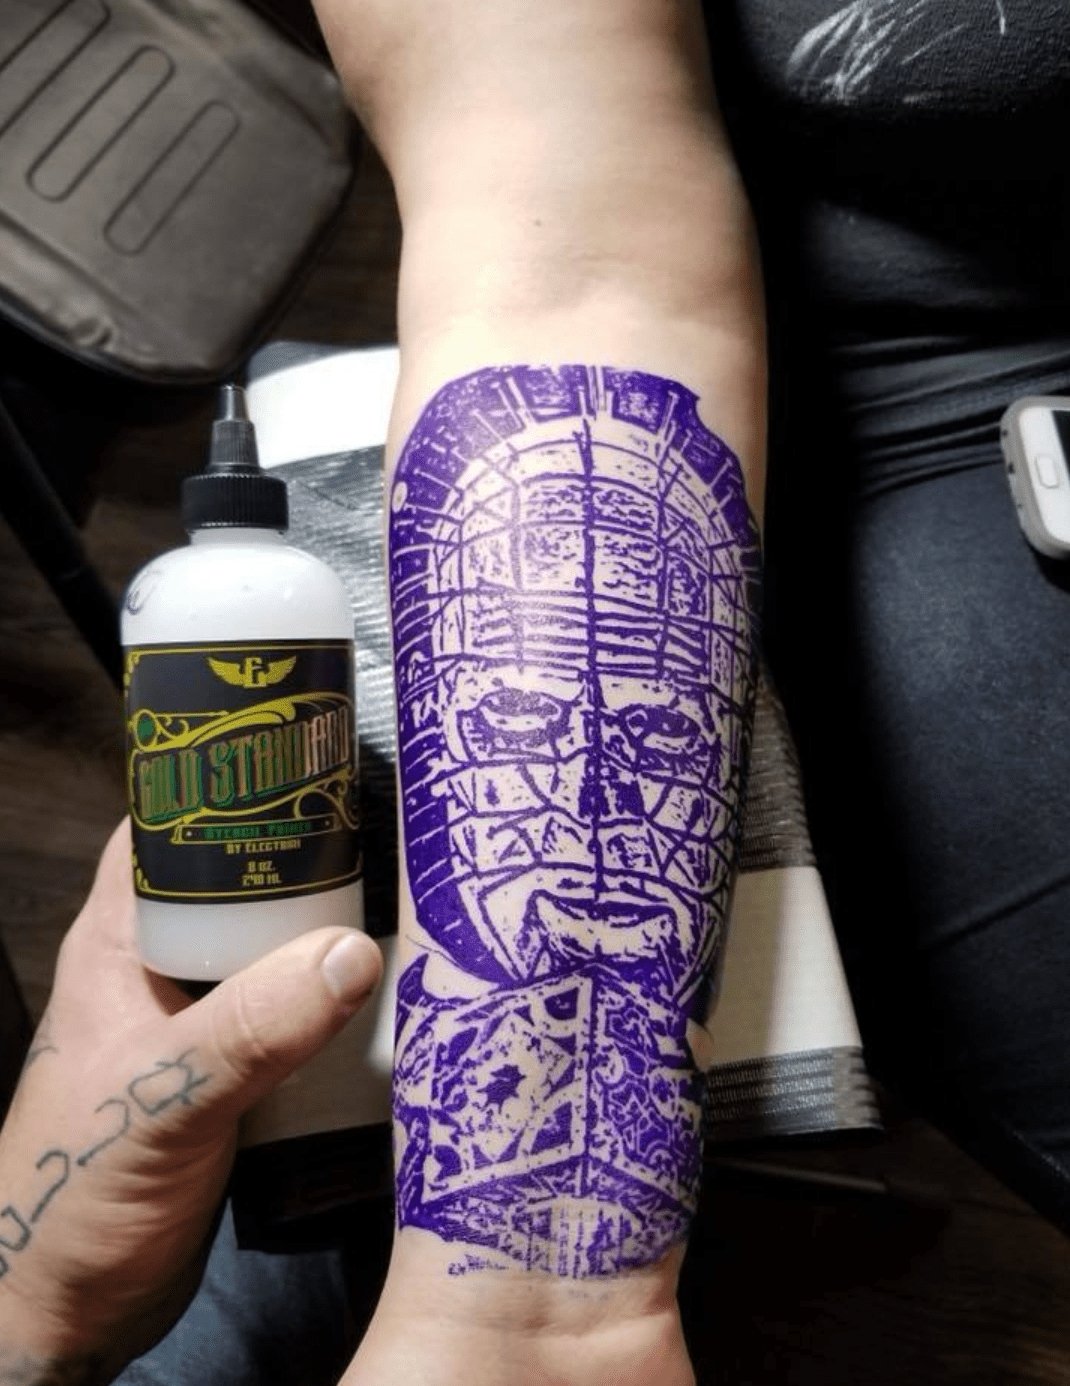 Electrum - Gold Standard Tattoo Stencil Primer from Electrum Supply - The Deadly North